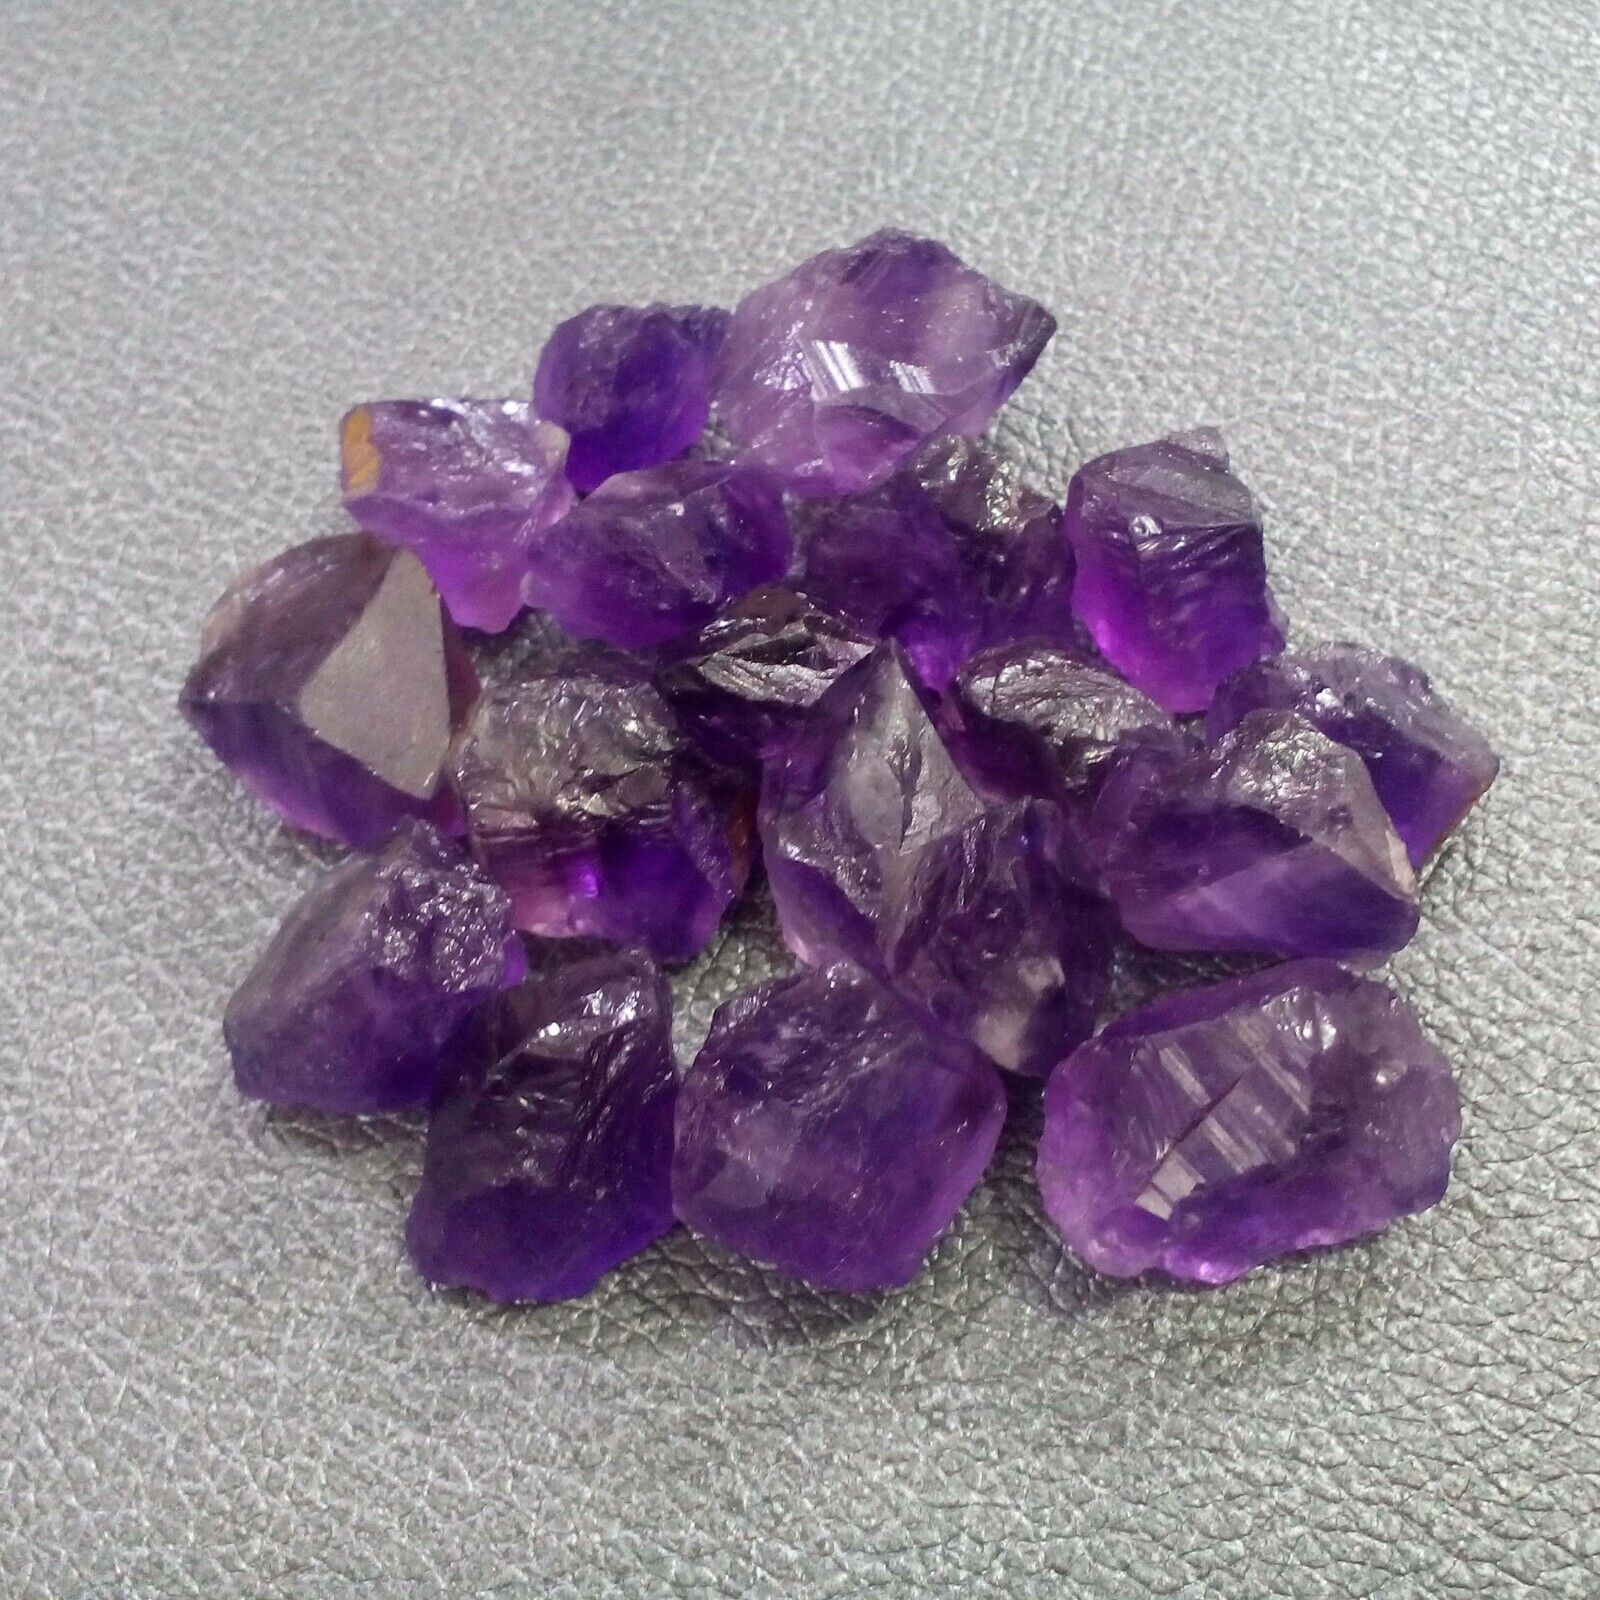 Attractive Purple Amethyst 20 Piece Raw Size 12-16 MM Rough Crystal For Jewelry